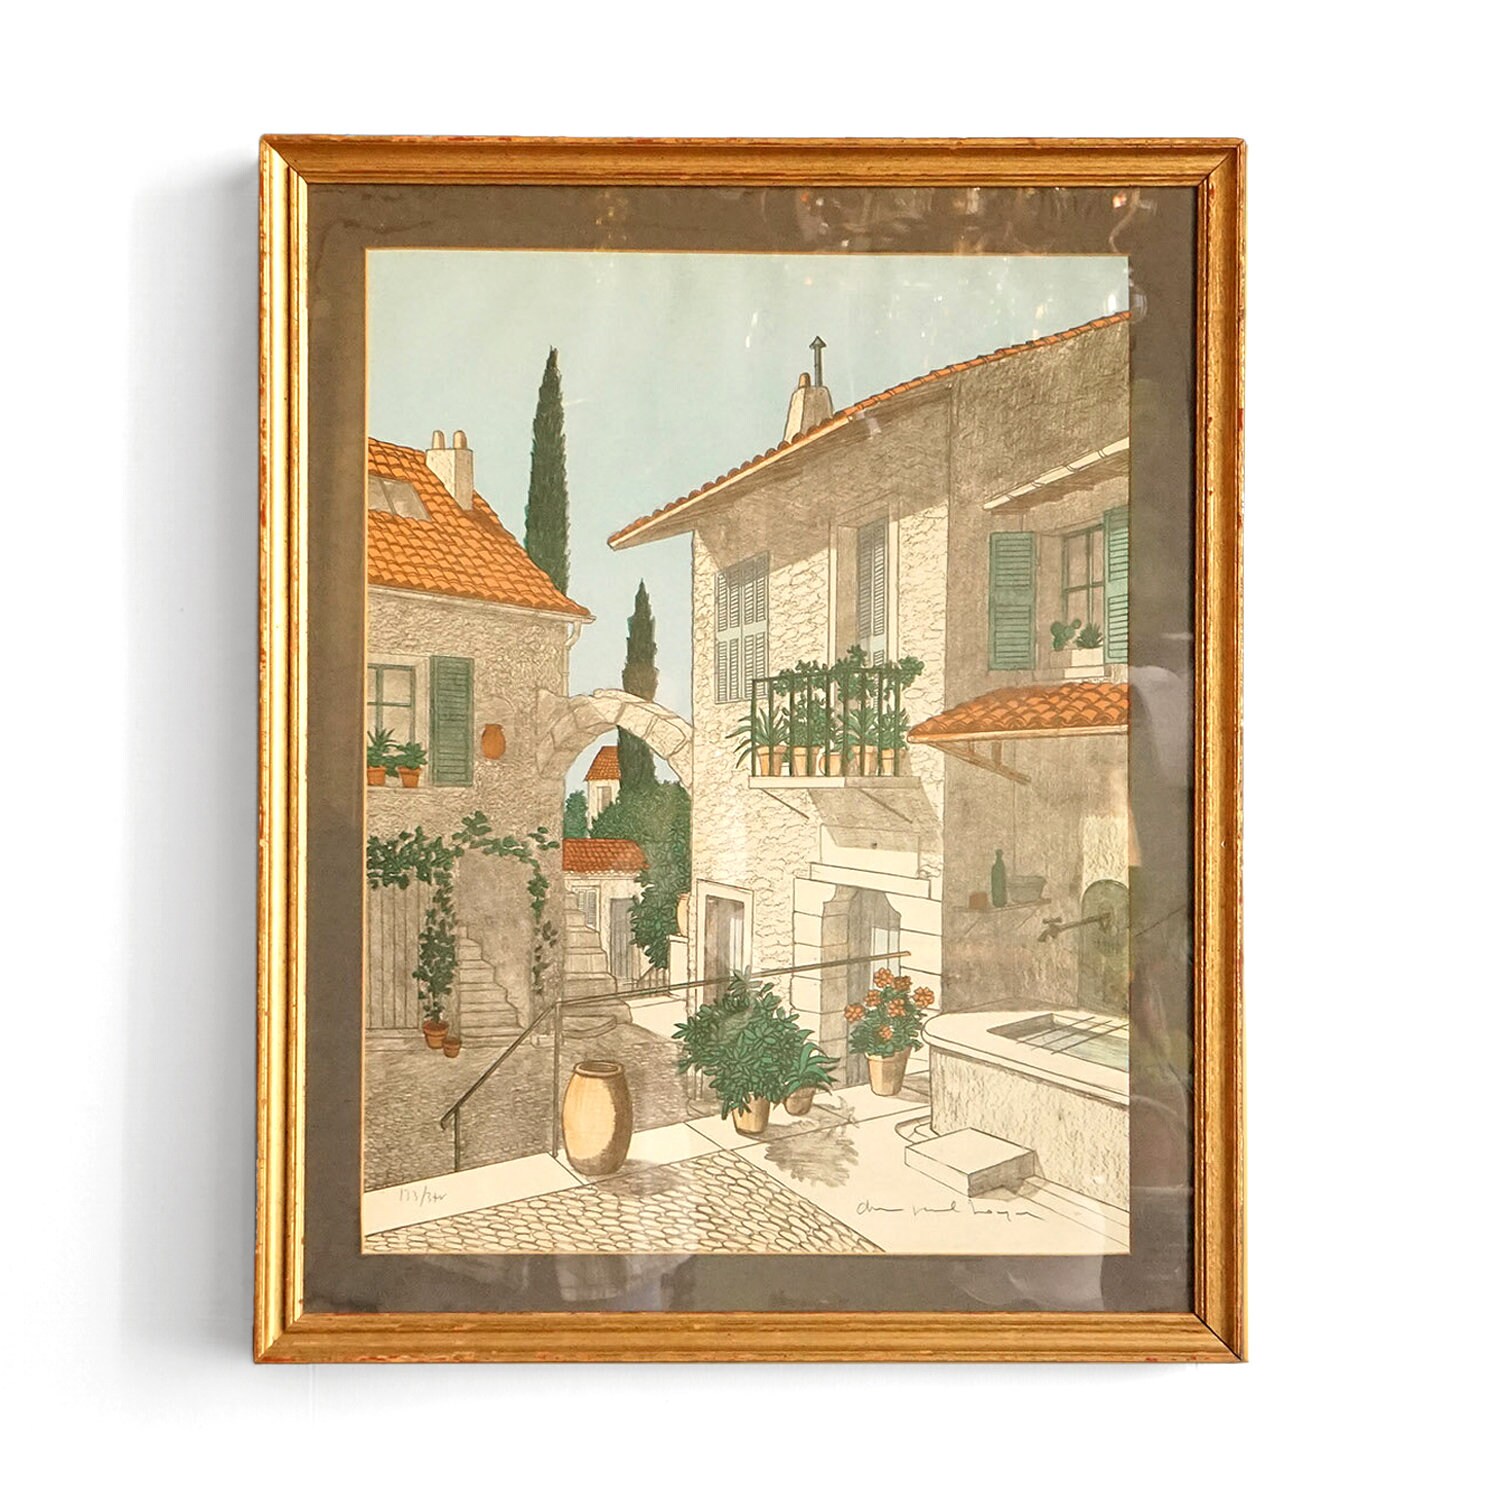 Denis Paul Noyer, [Still Life] Oil Painting on Canvas, Framed, List Price  $5,500 (1963), Available for Sale